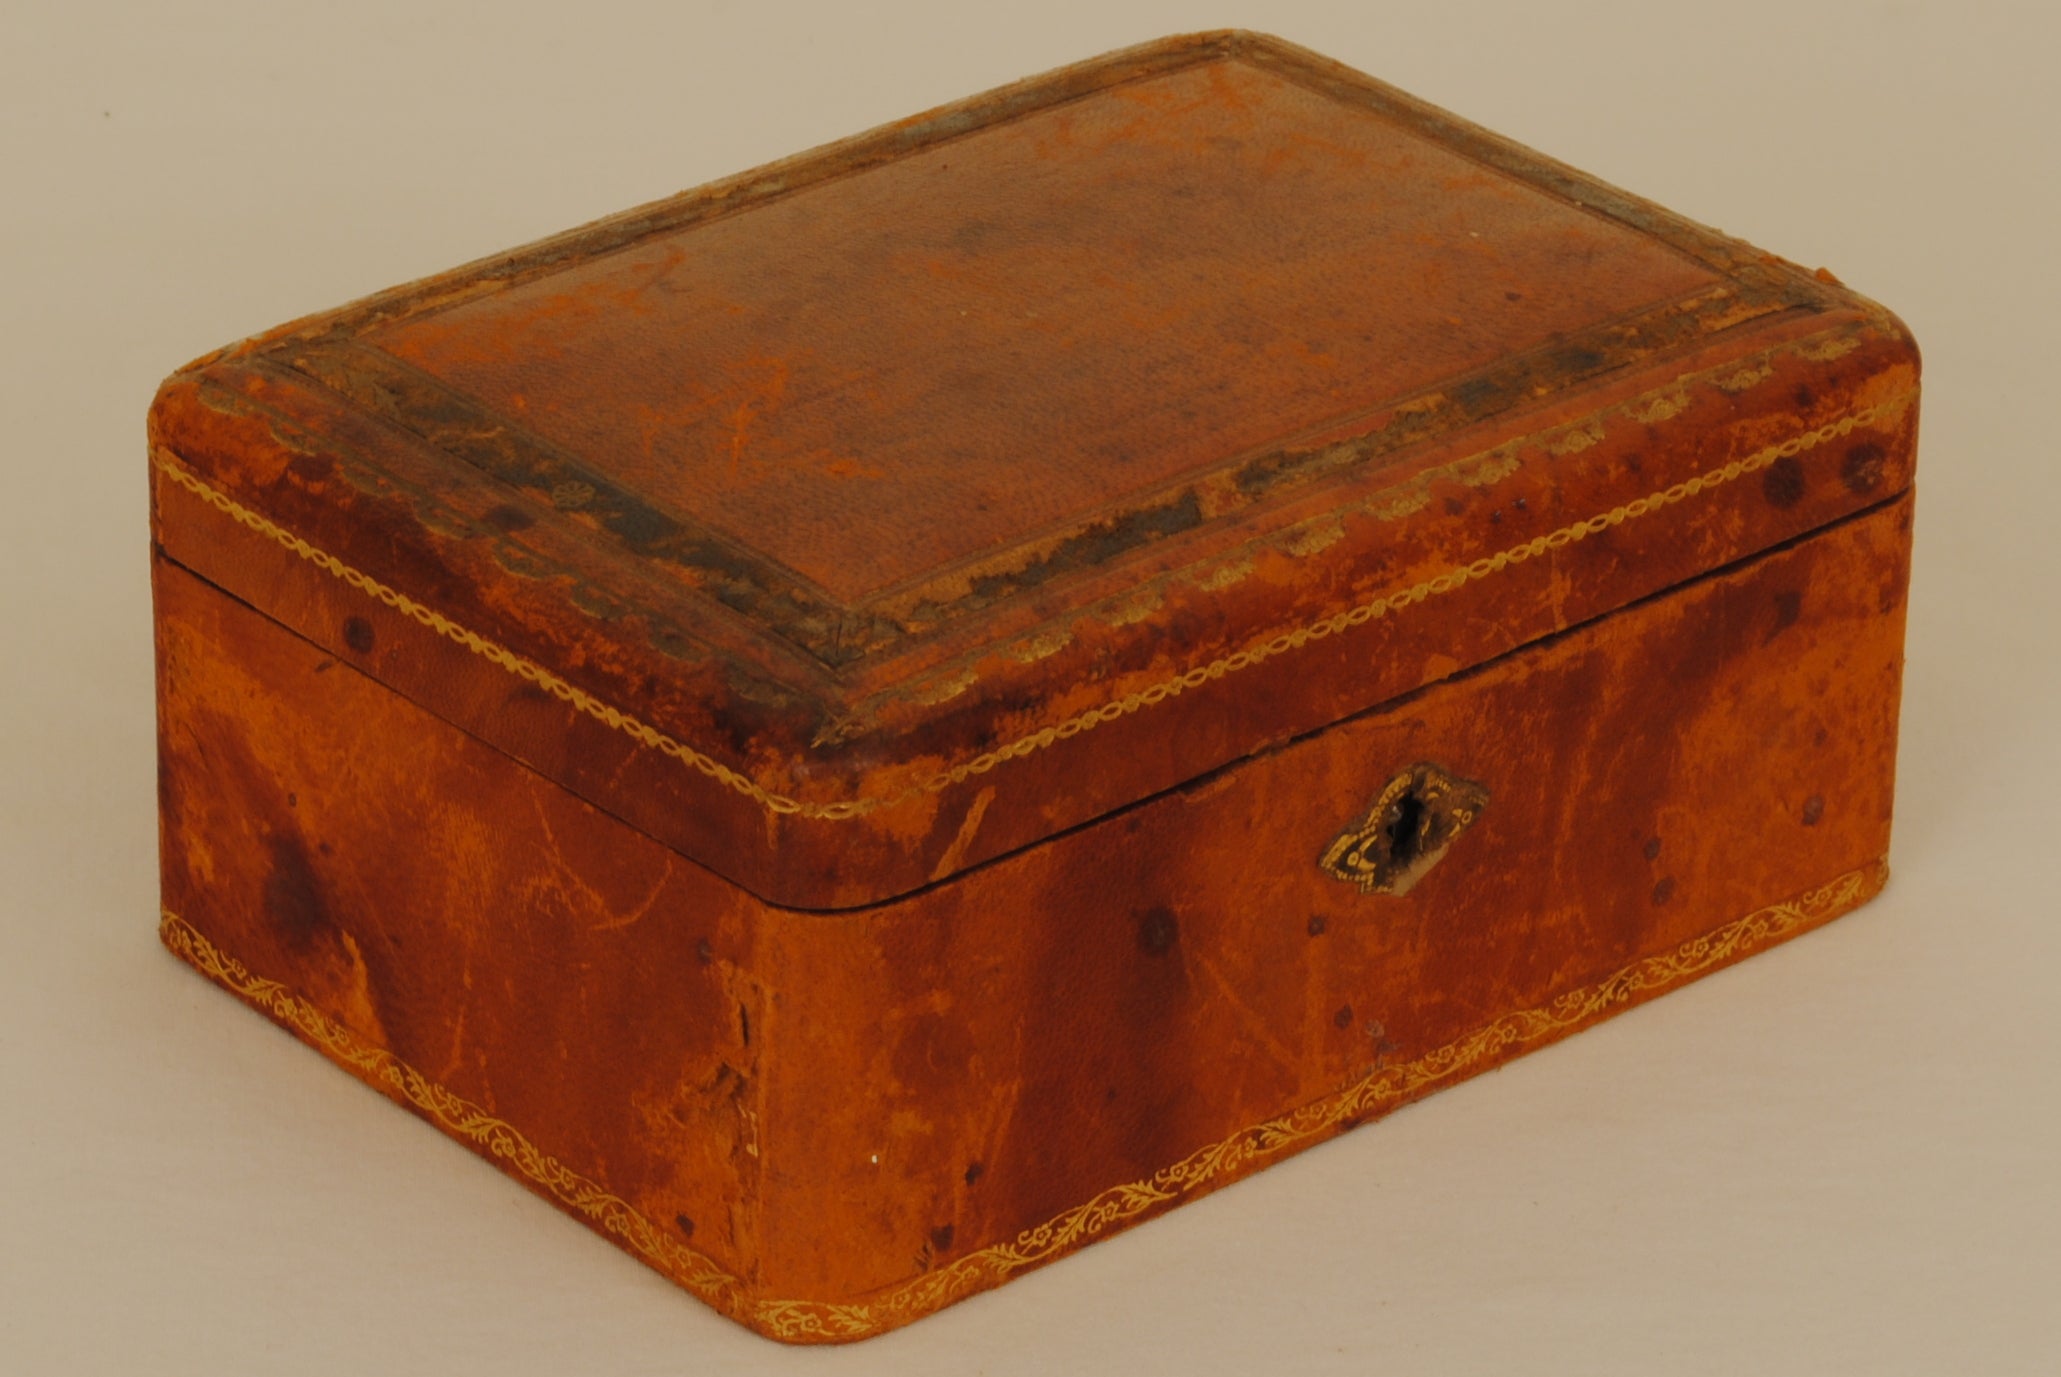 French Mid-19th Century Leather and Gilt Decorated Jewelry Box